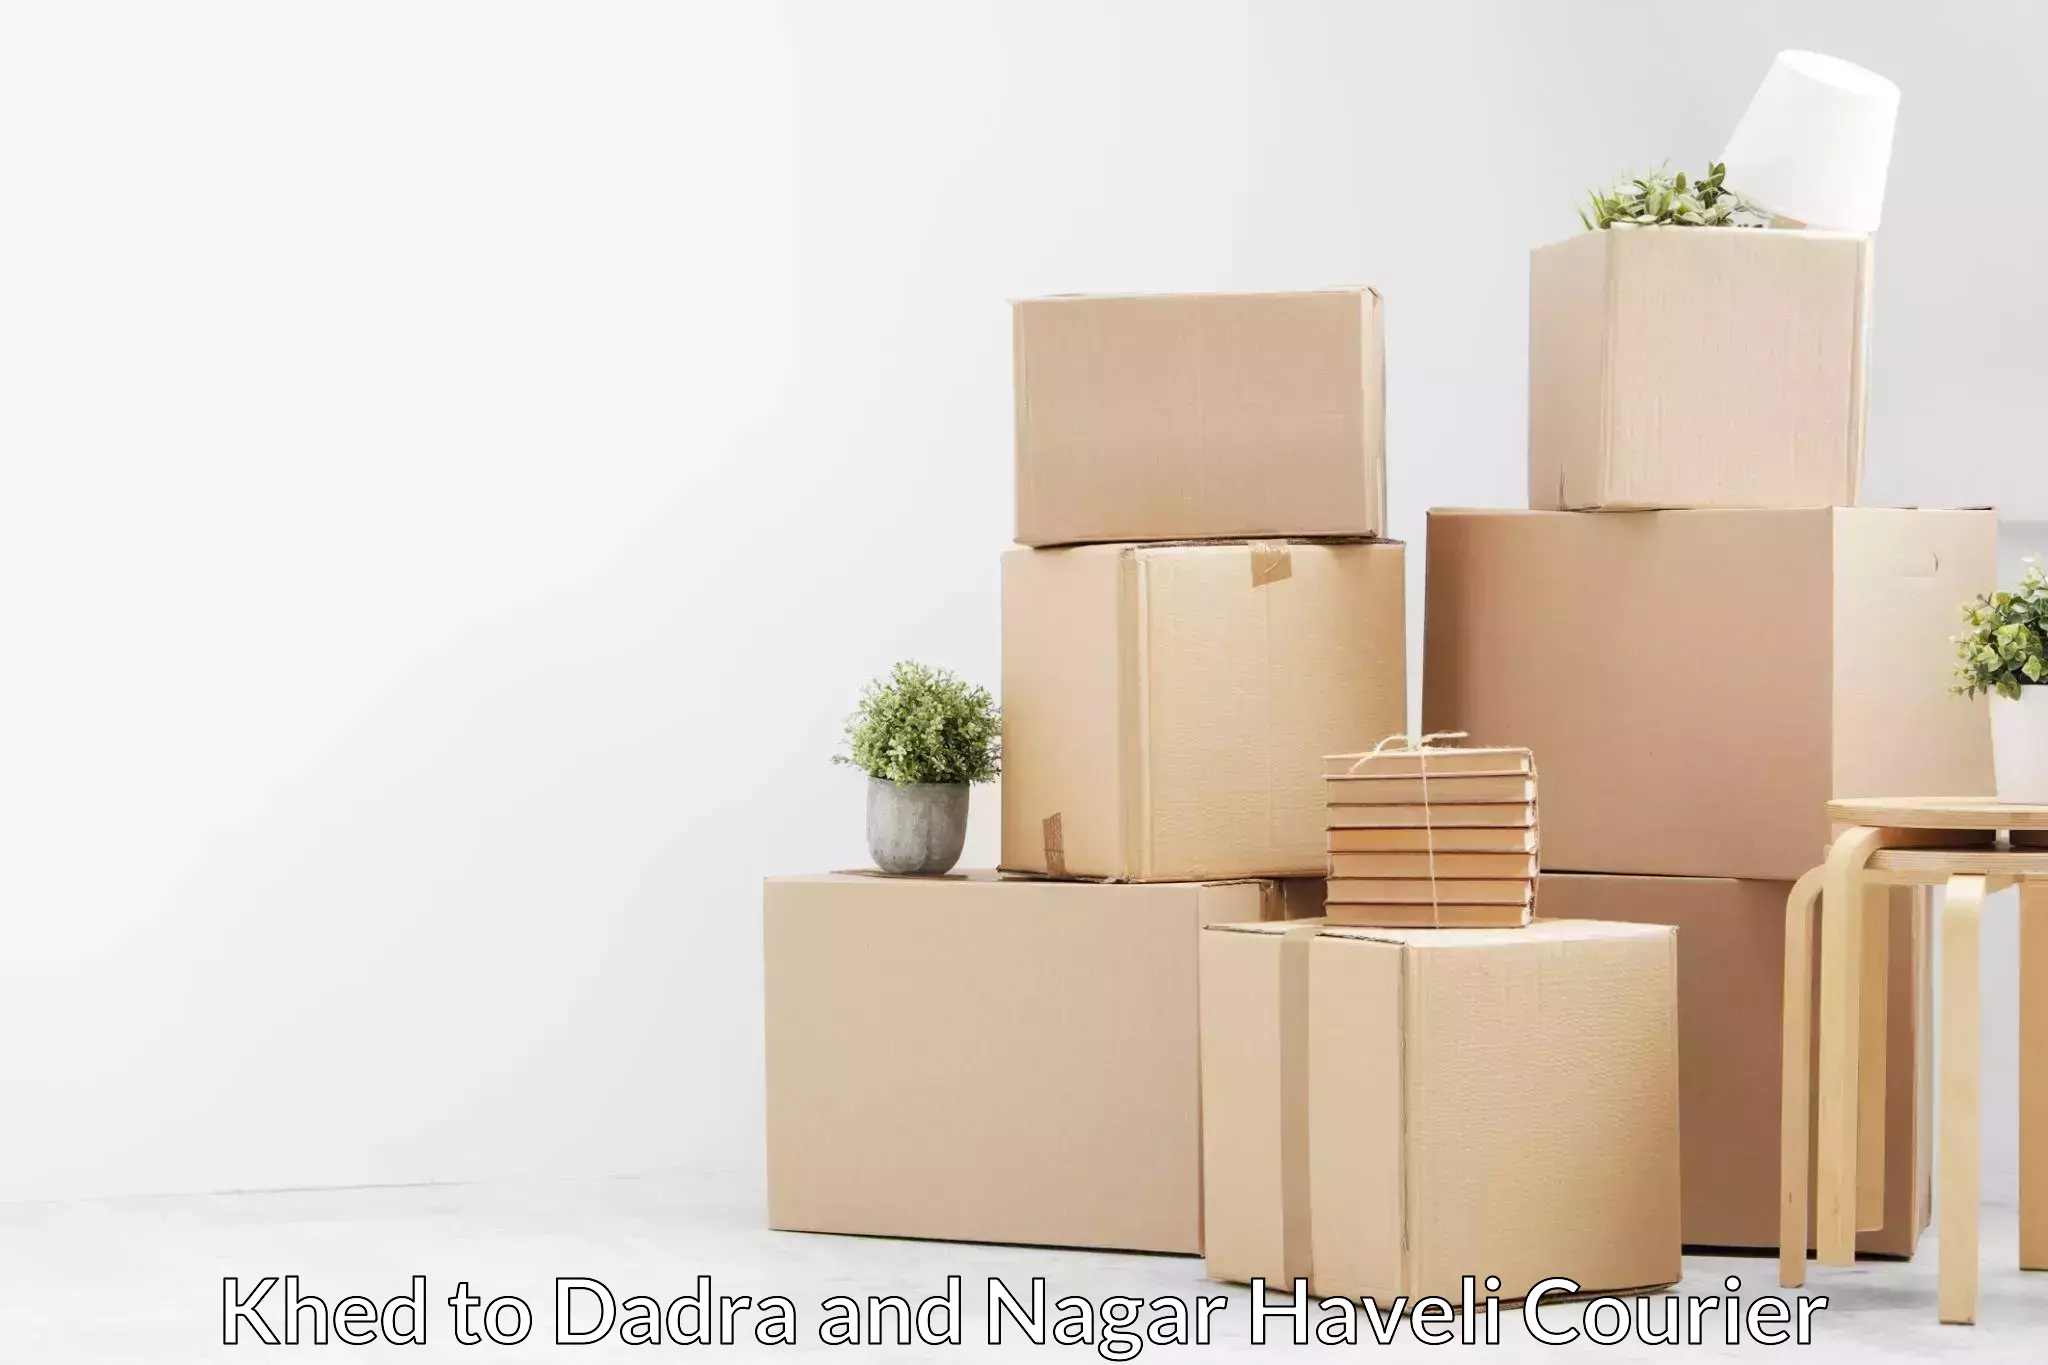 Home relocation experts Khed to Dadra and Nagar Haveli